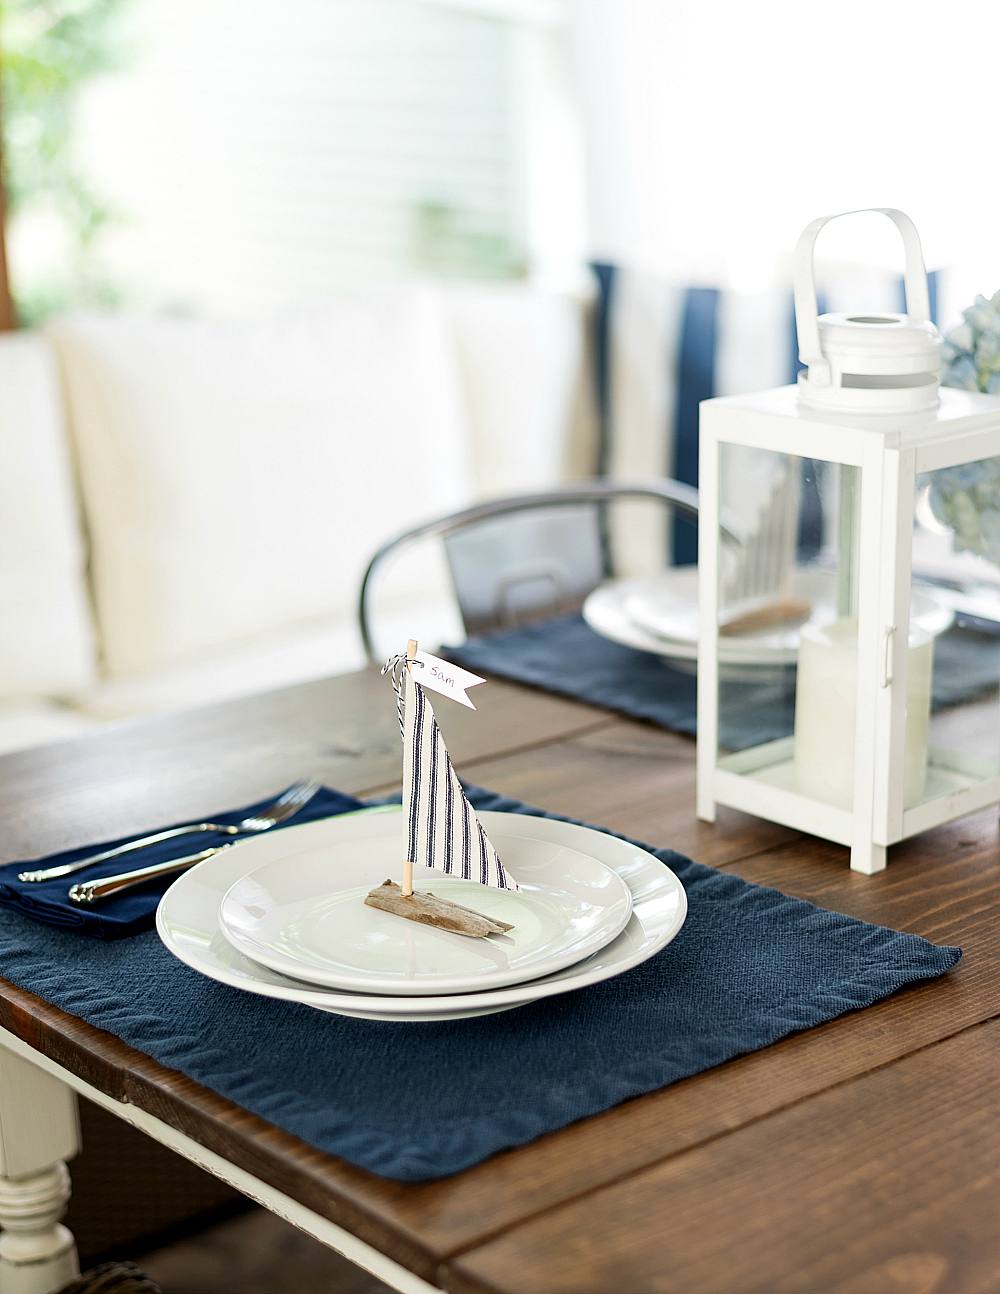 Wedding table setting ideas in navy white sailboats from driftwood